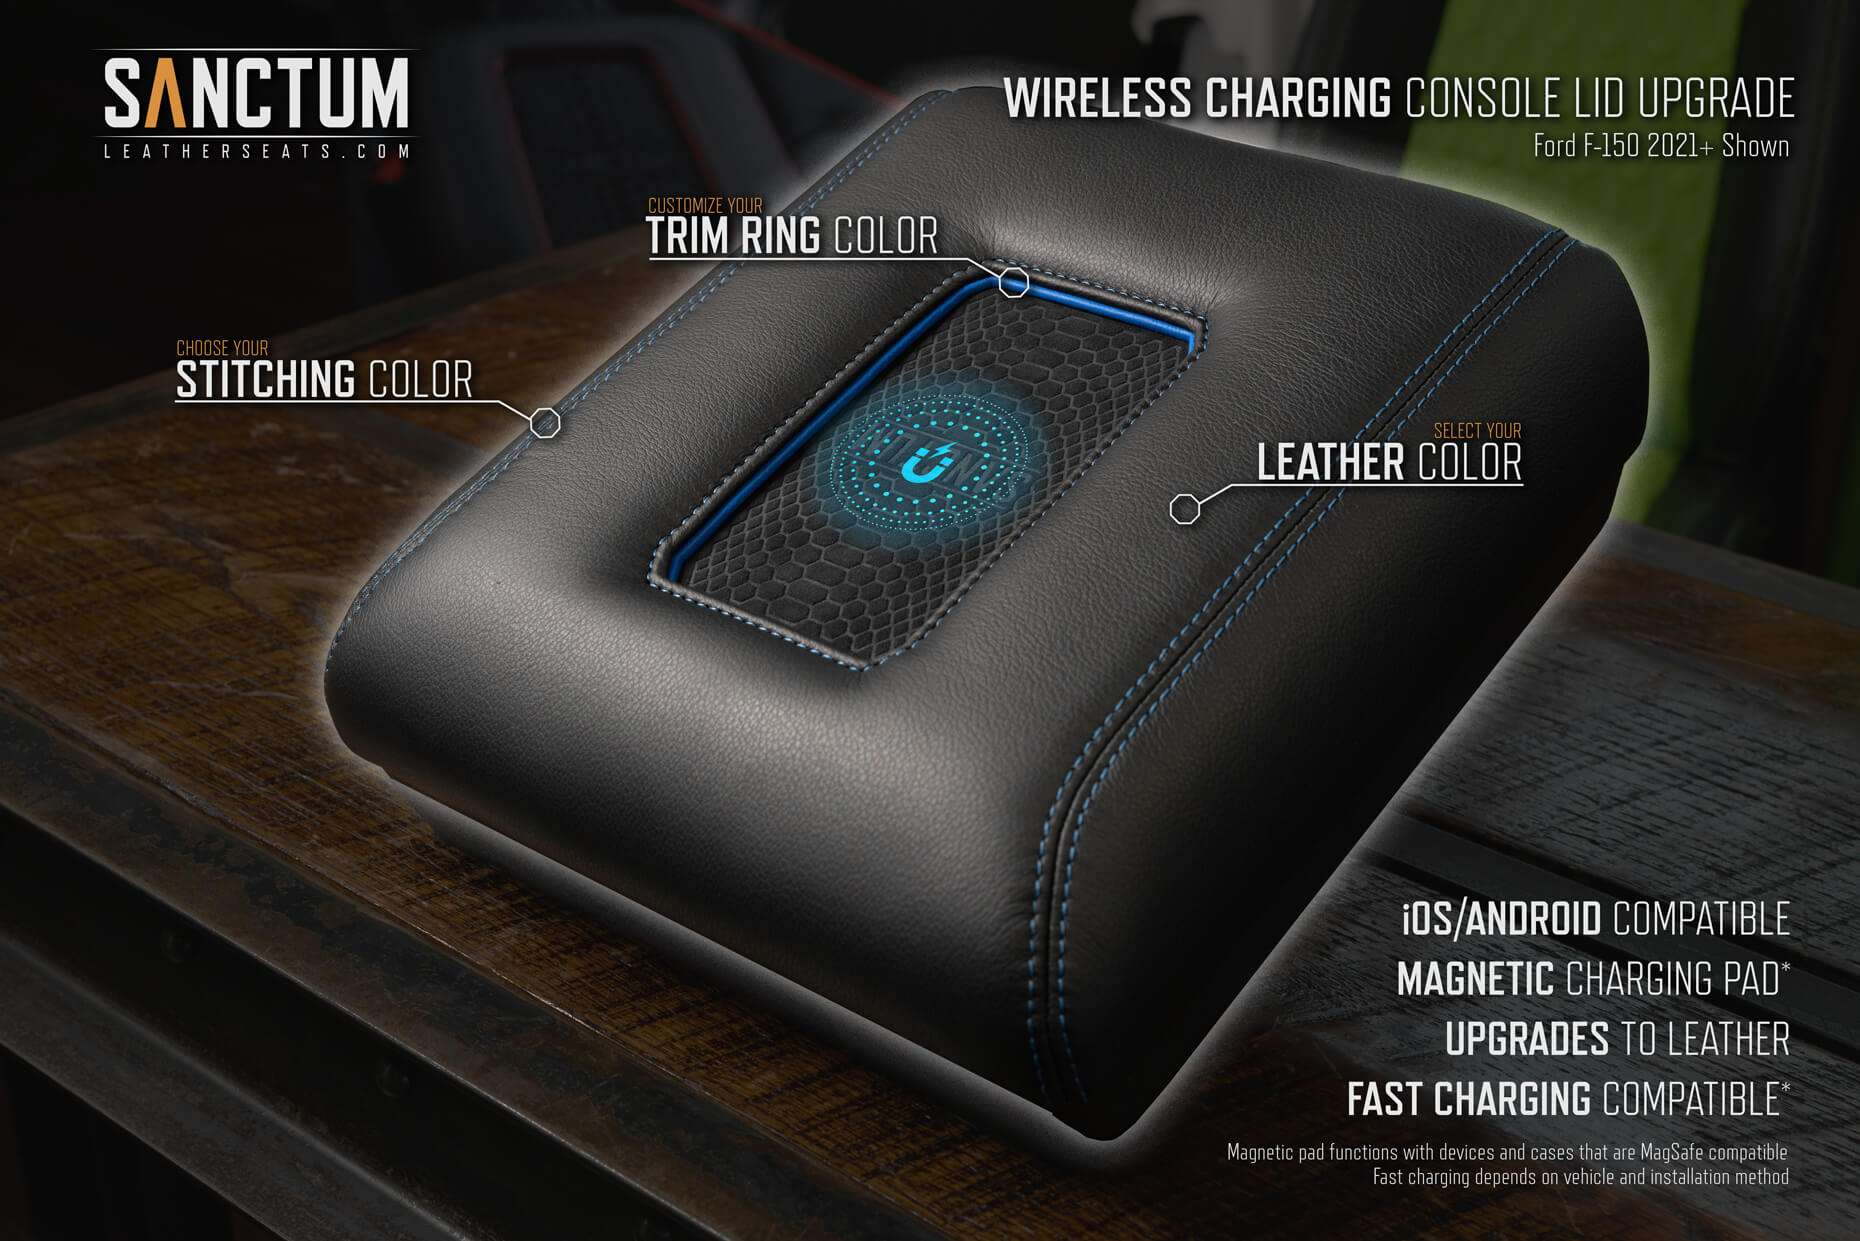 Ford F-150 21+ Sanctum Wirleess Charging Console Features